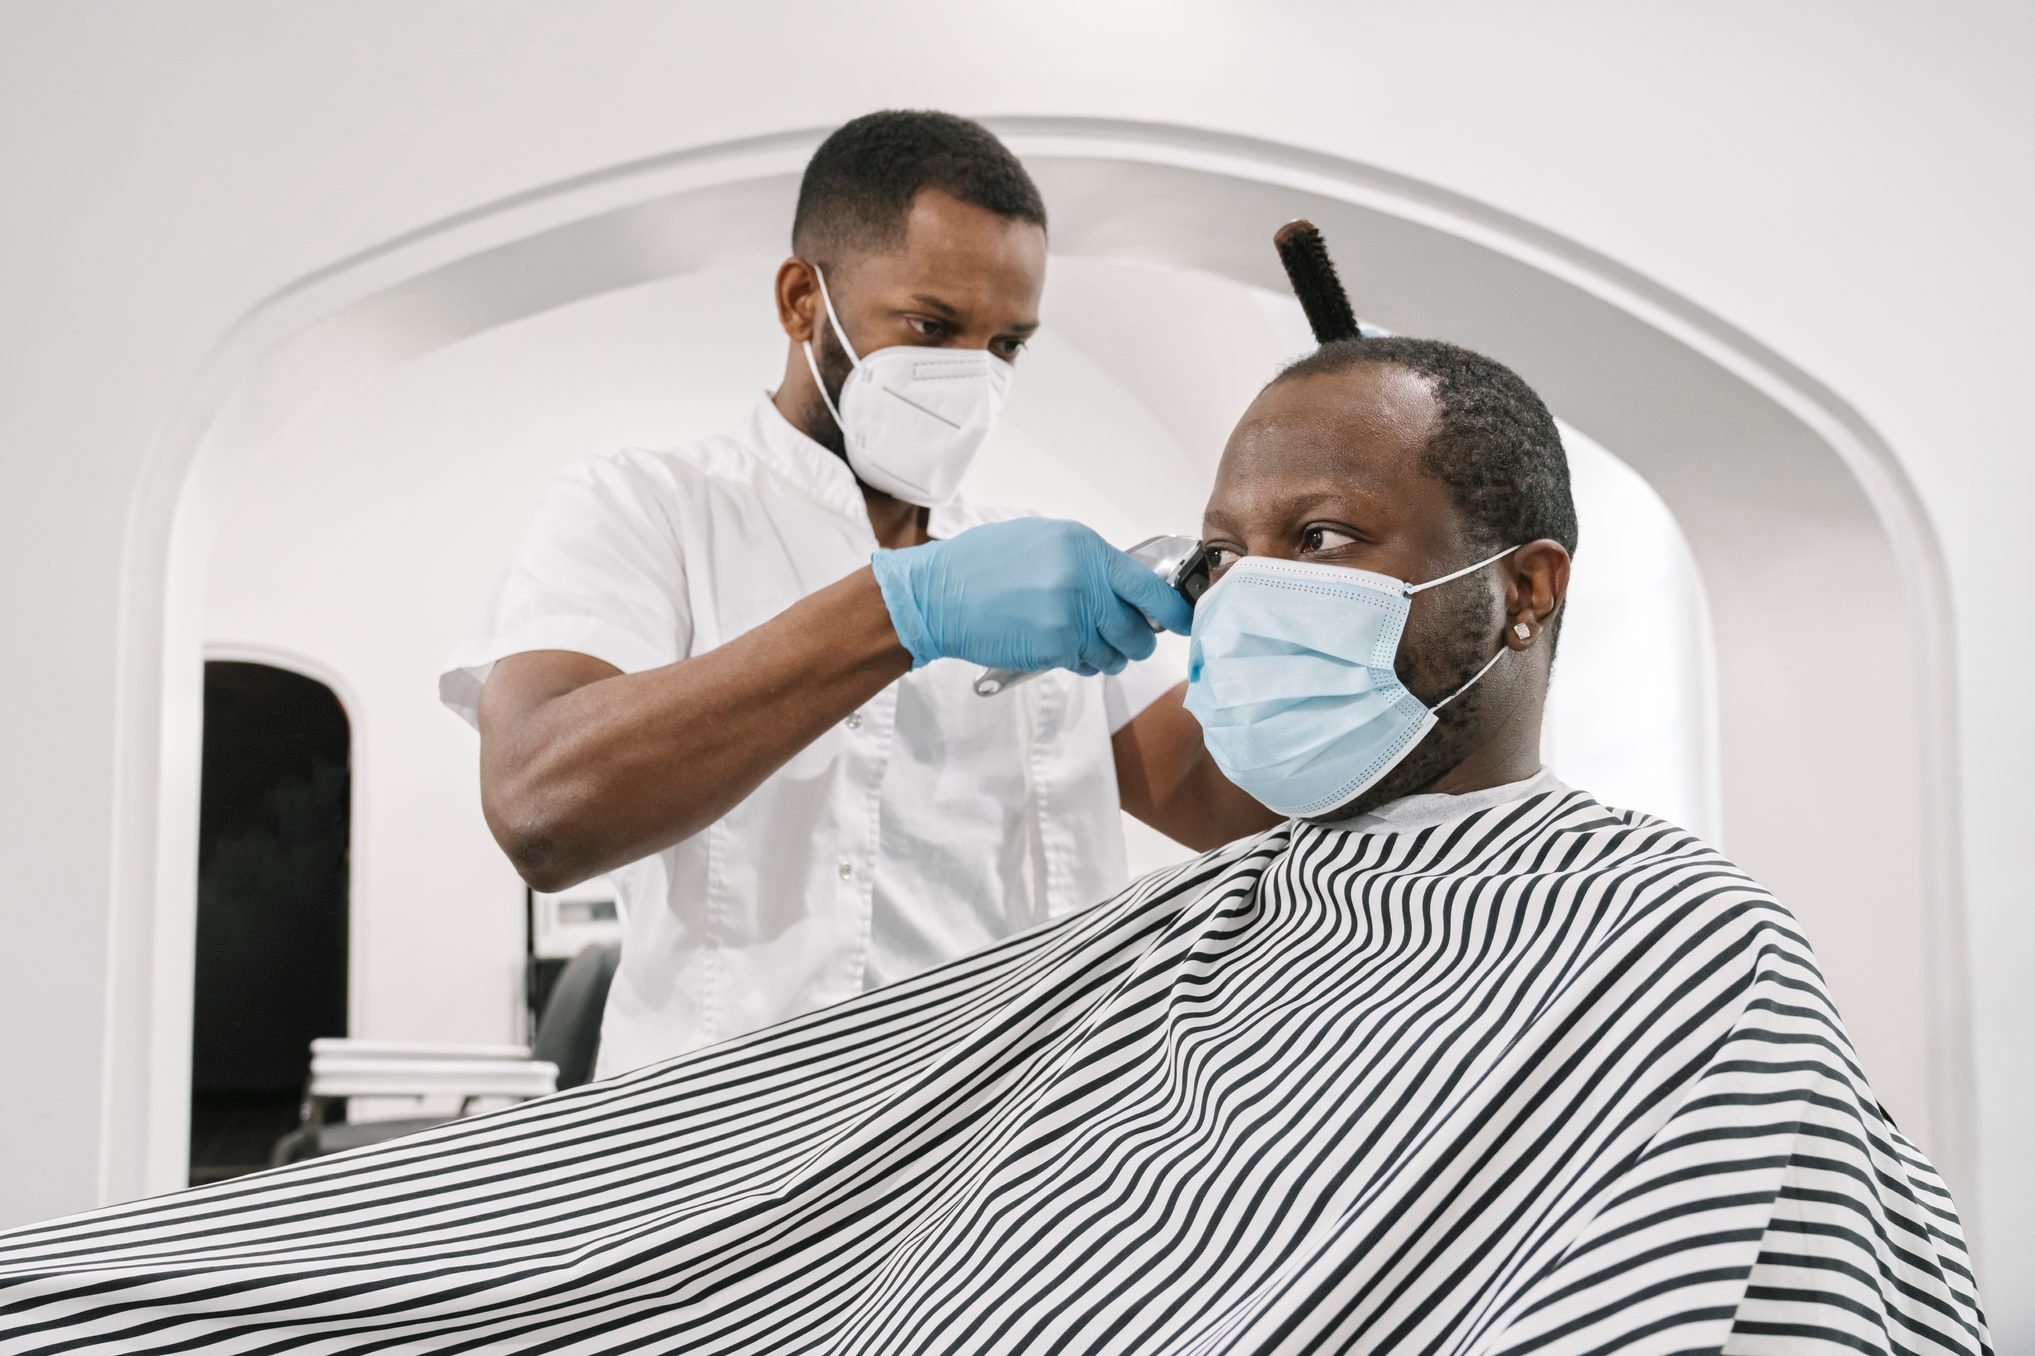 Barber wearing surgical mask and gloves cutting hair of customer